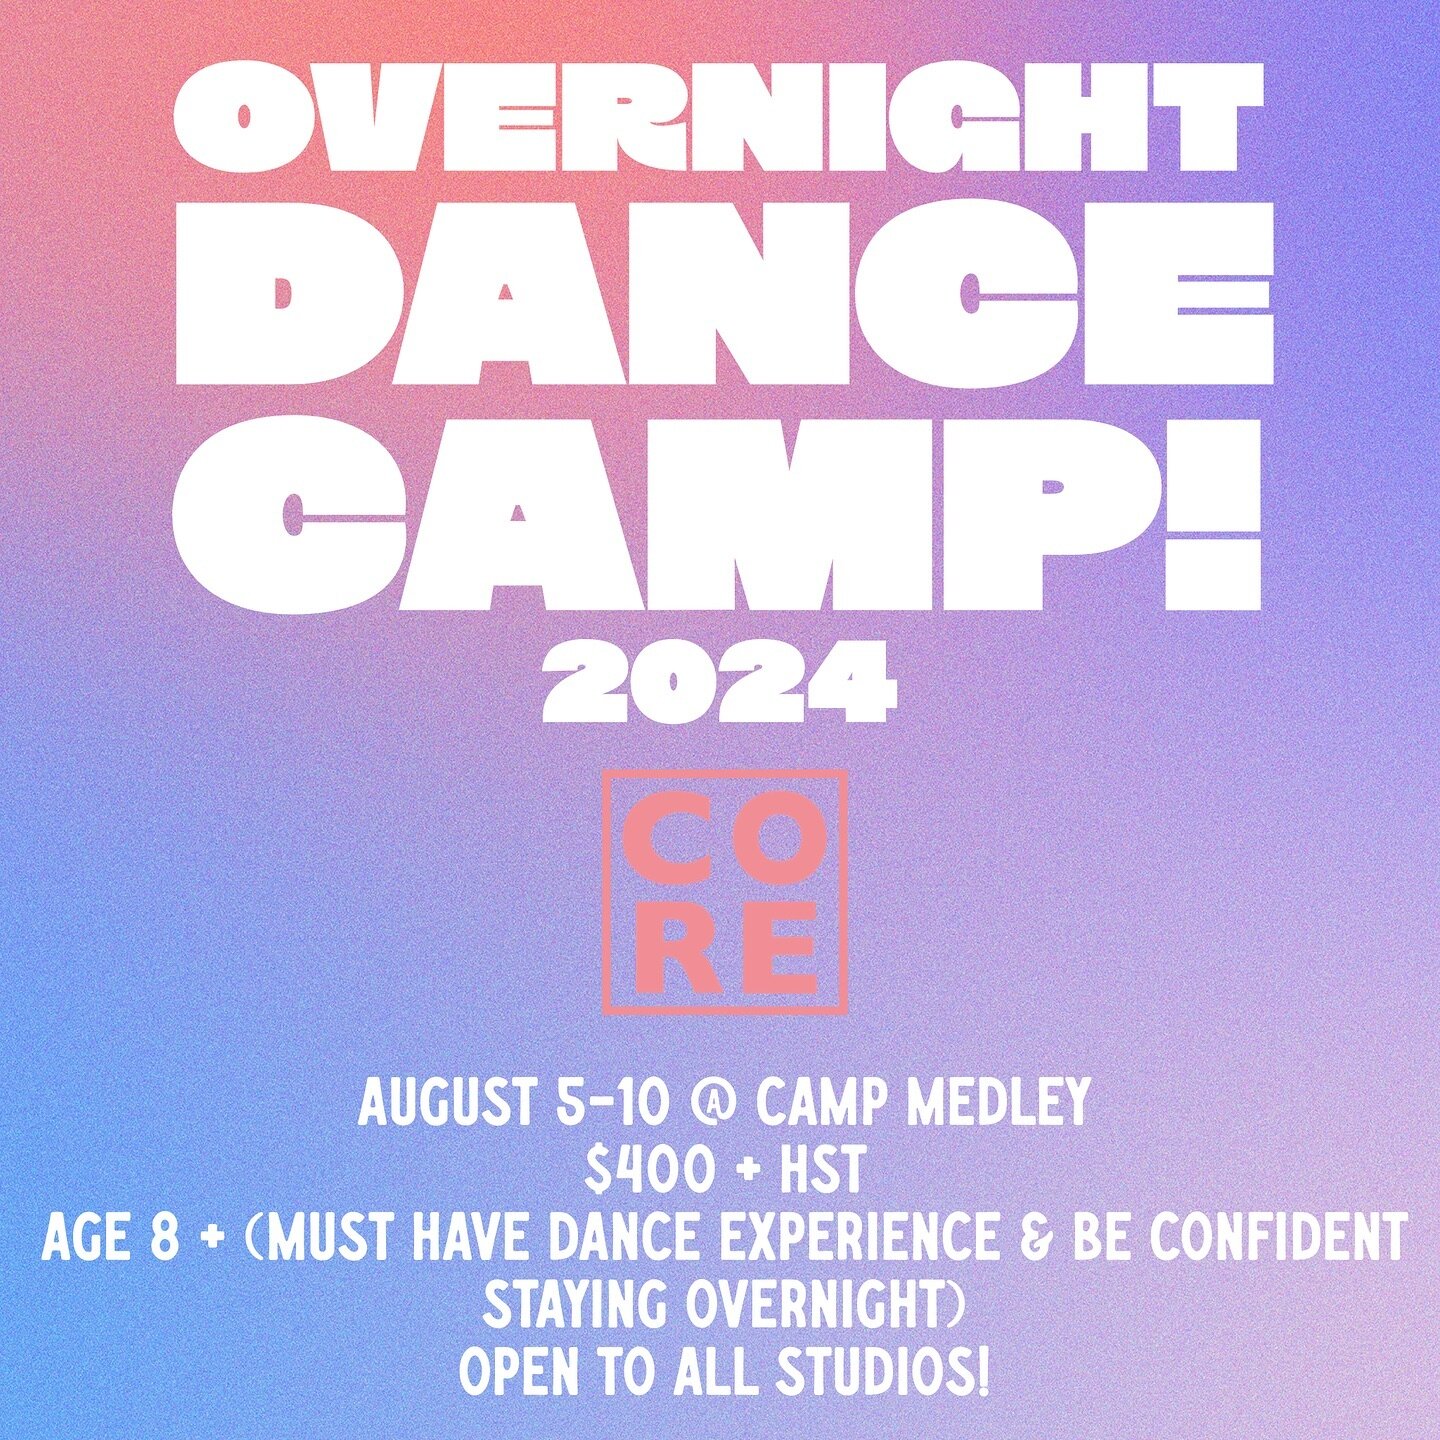 Who&rsquo;s ready for a week of dance, summer fun, &amp; new friends!? We are so excited for another year of overnight dance camp coming up August 2024 🙌🏻 Our overnight dance camp is a week full of daily dance classes, cabin challenges &amp; games,